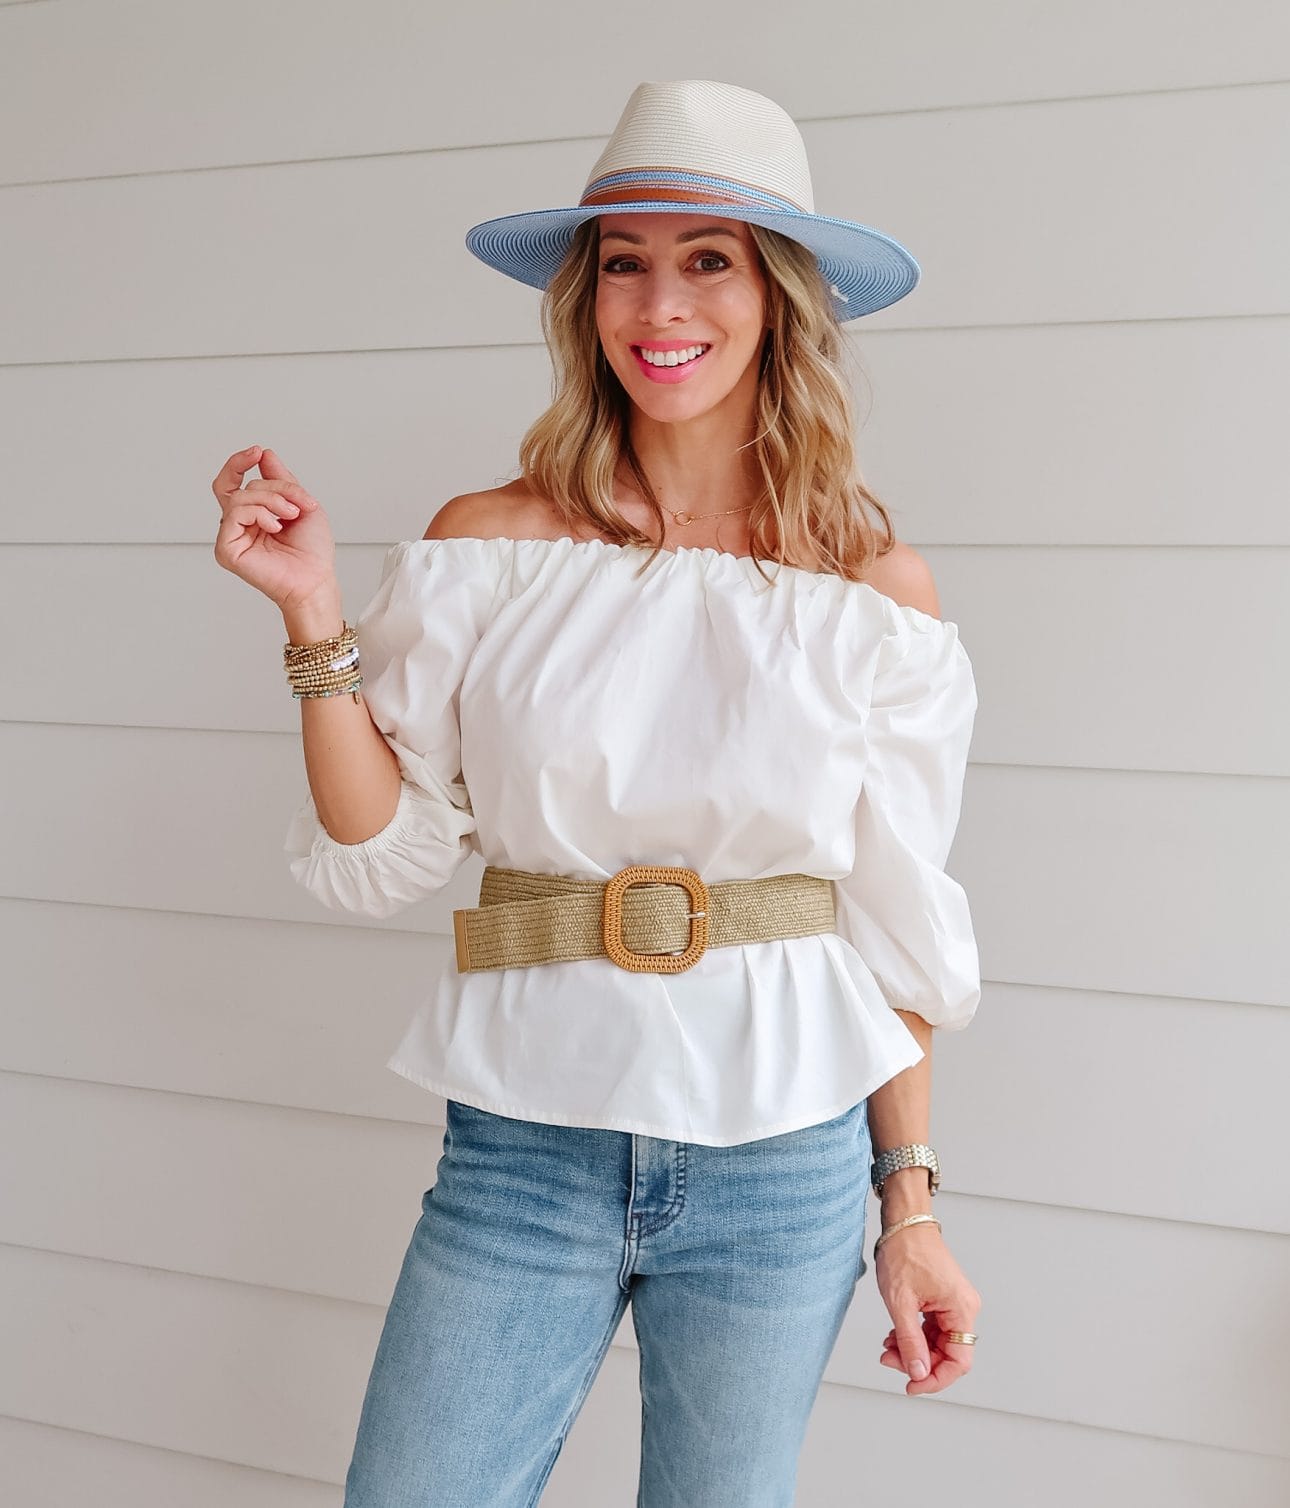 Affordable Spring Styles  White Jeans Under $25 • Honey We're Home